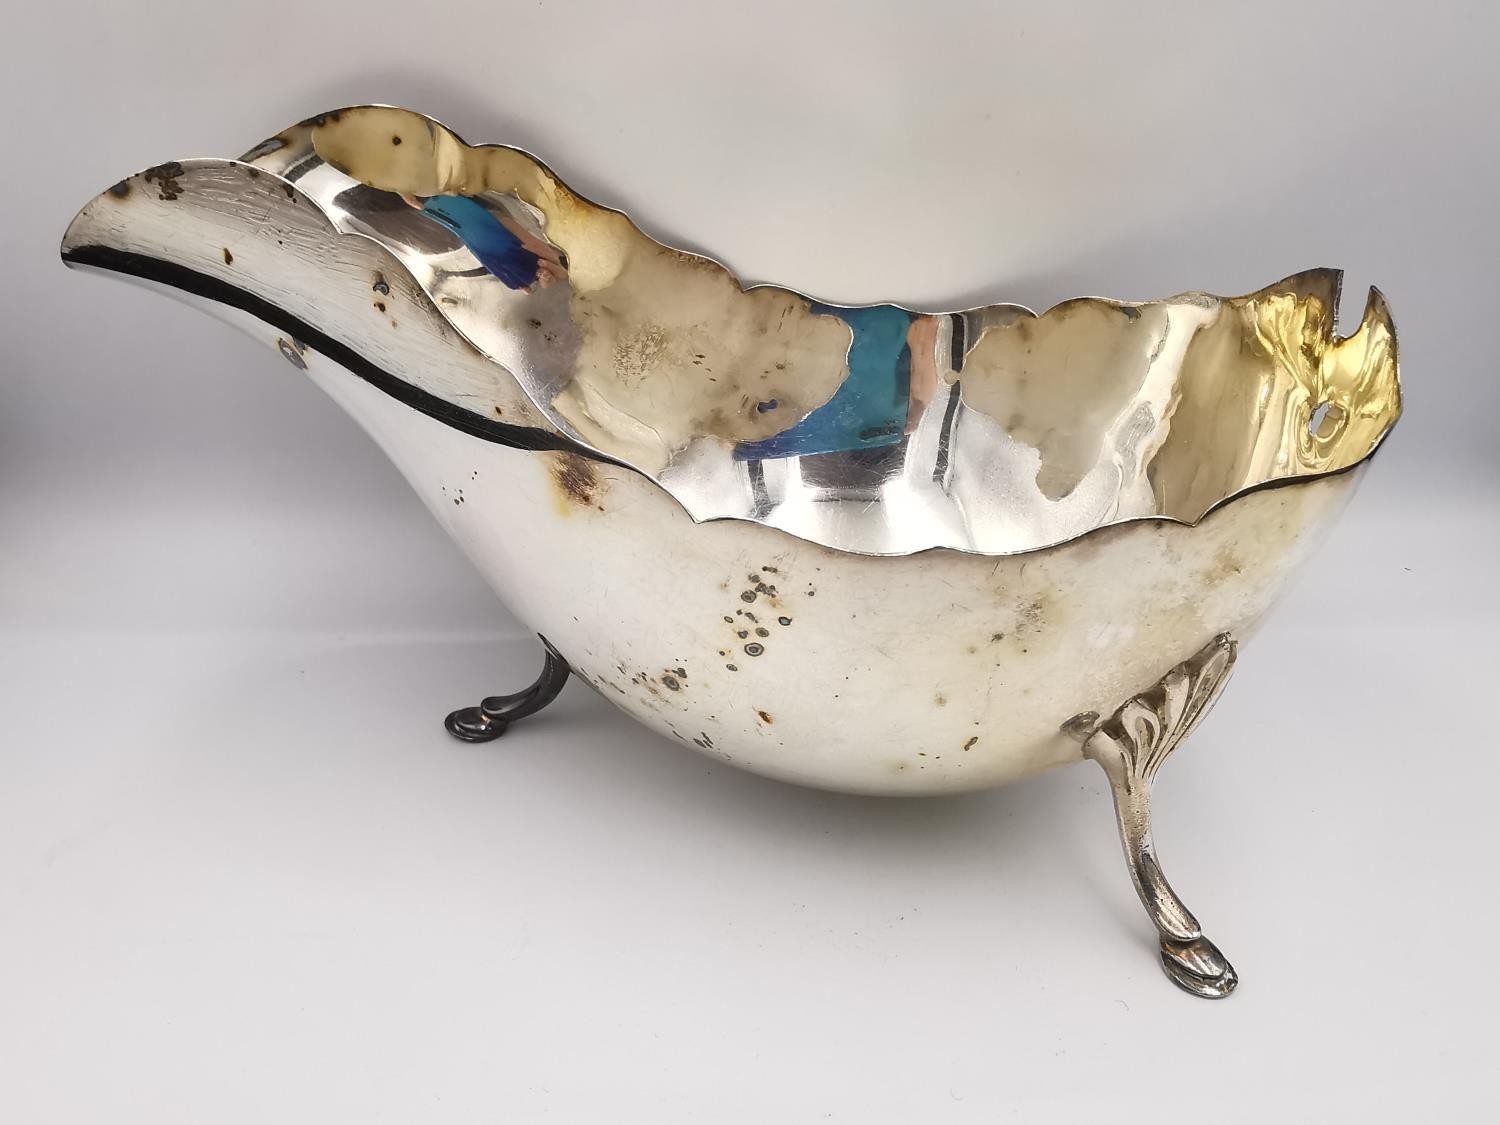 An Edwardian sterling silver sauce boat by Joseph Rodgers & Sons (handle broken) along with a - Image 4 of 14